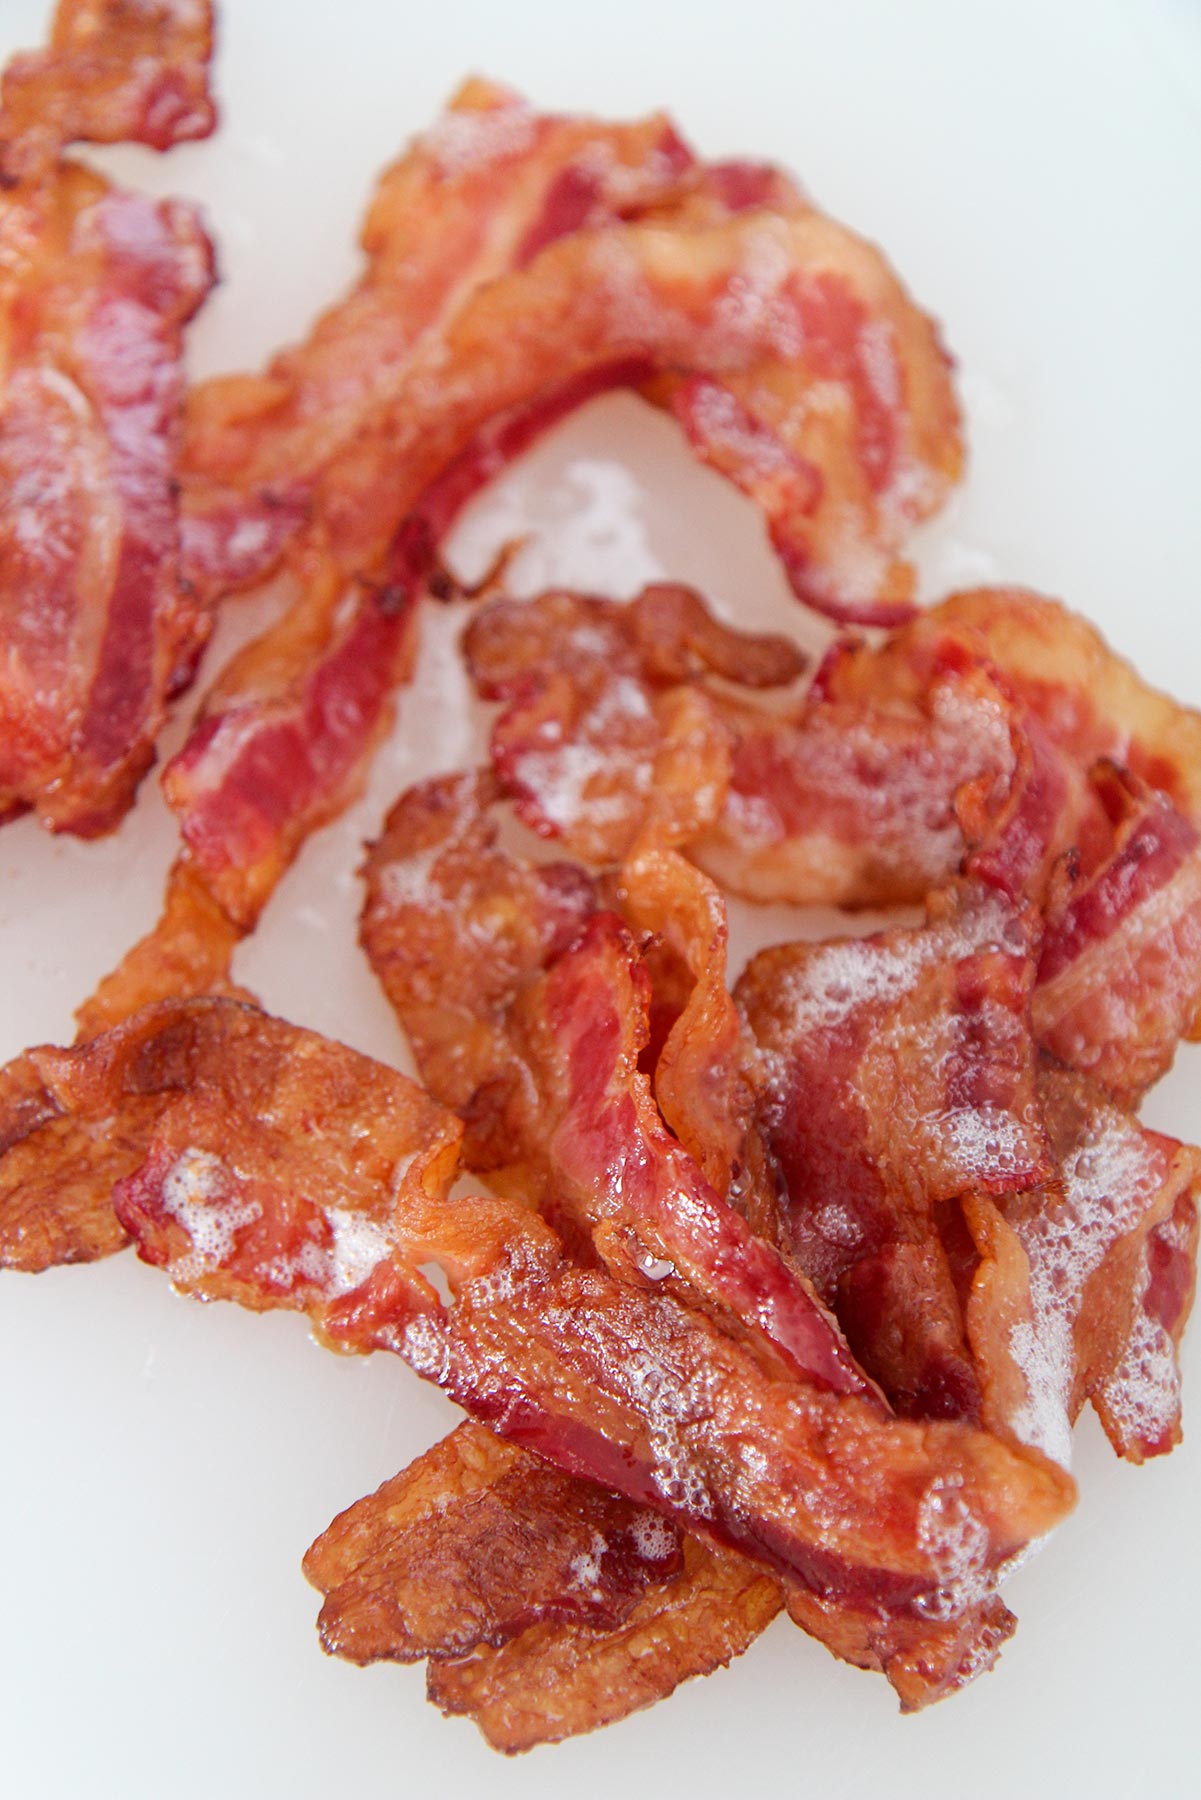 https://www.cookedbyjulie.com/wp-content/uploads/2020/03/oven-bacon-one.jpg